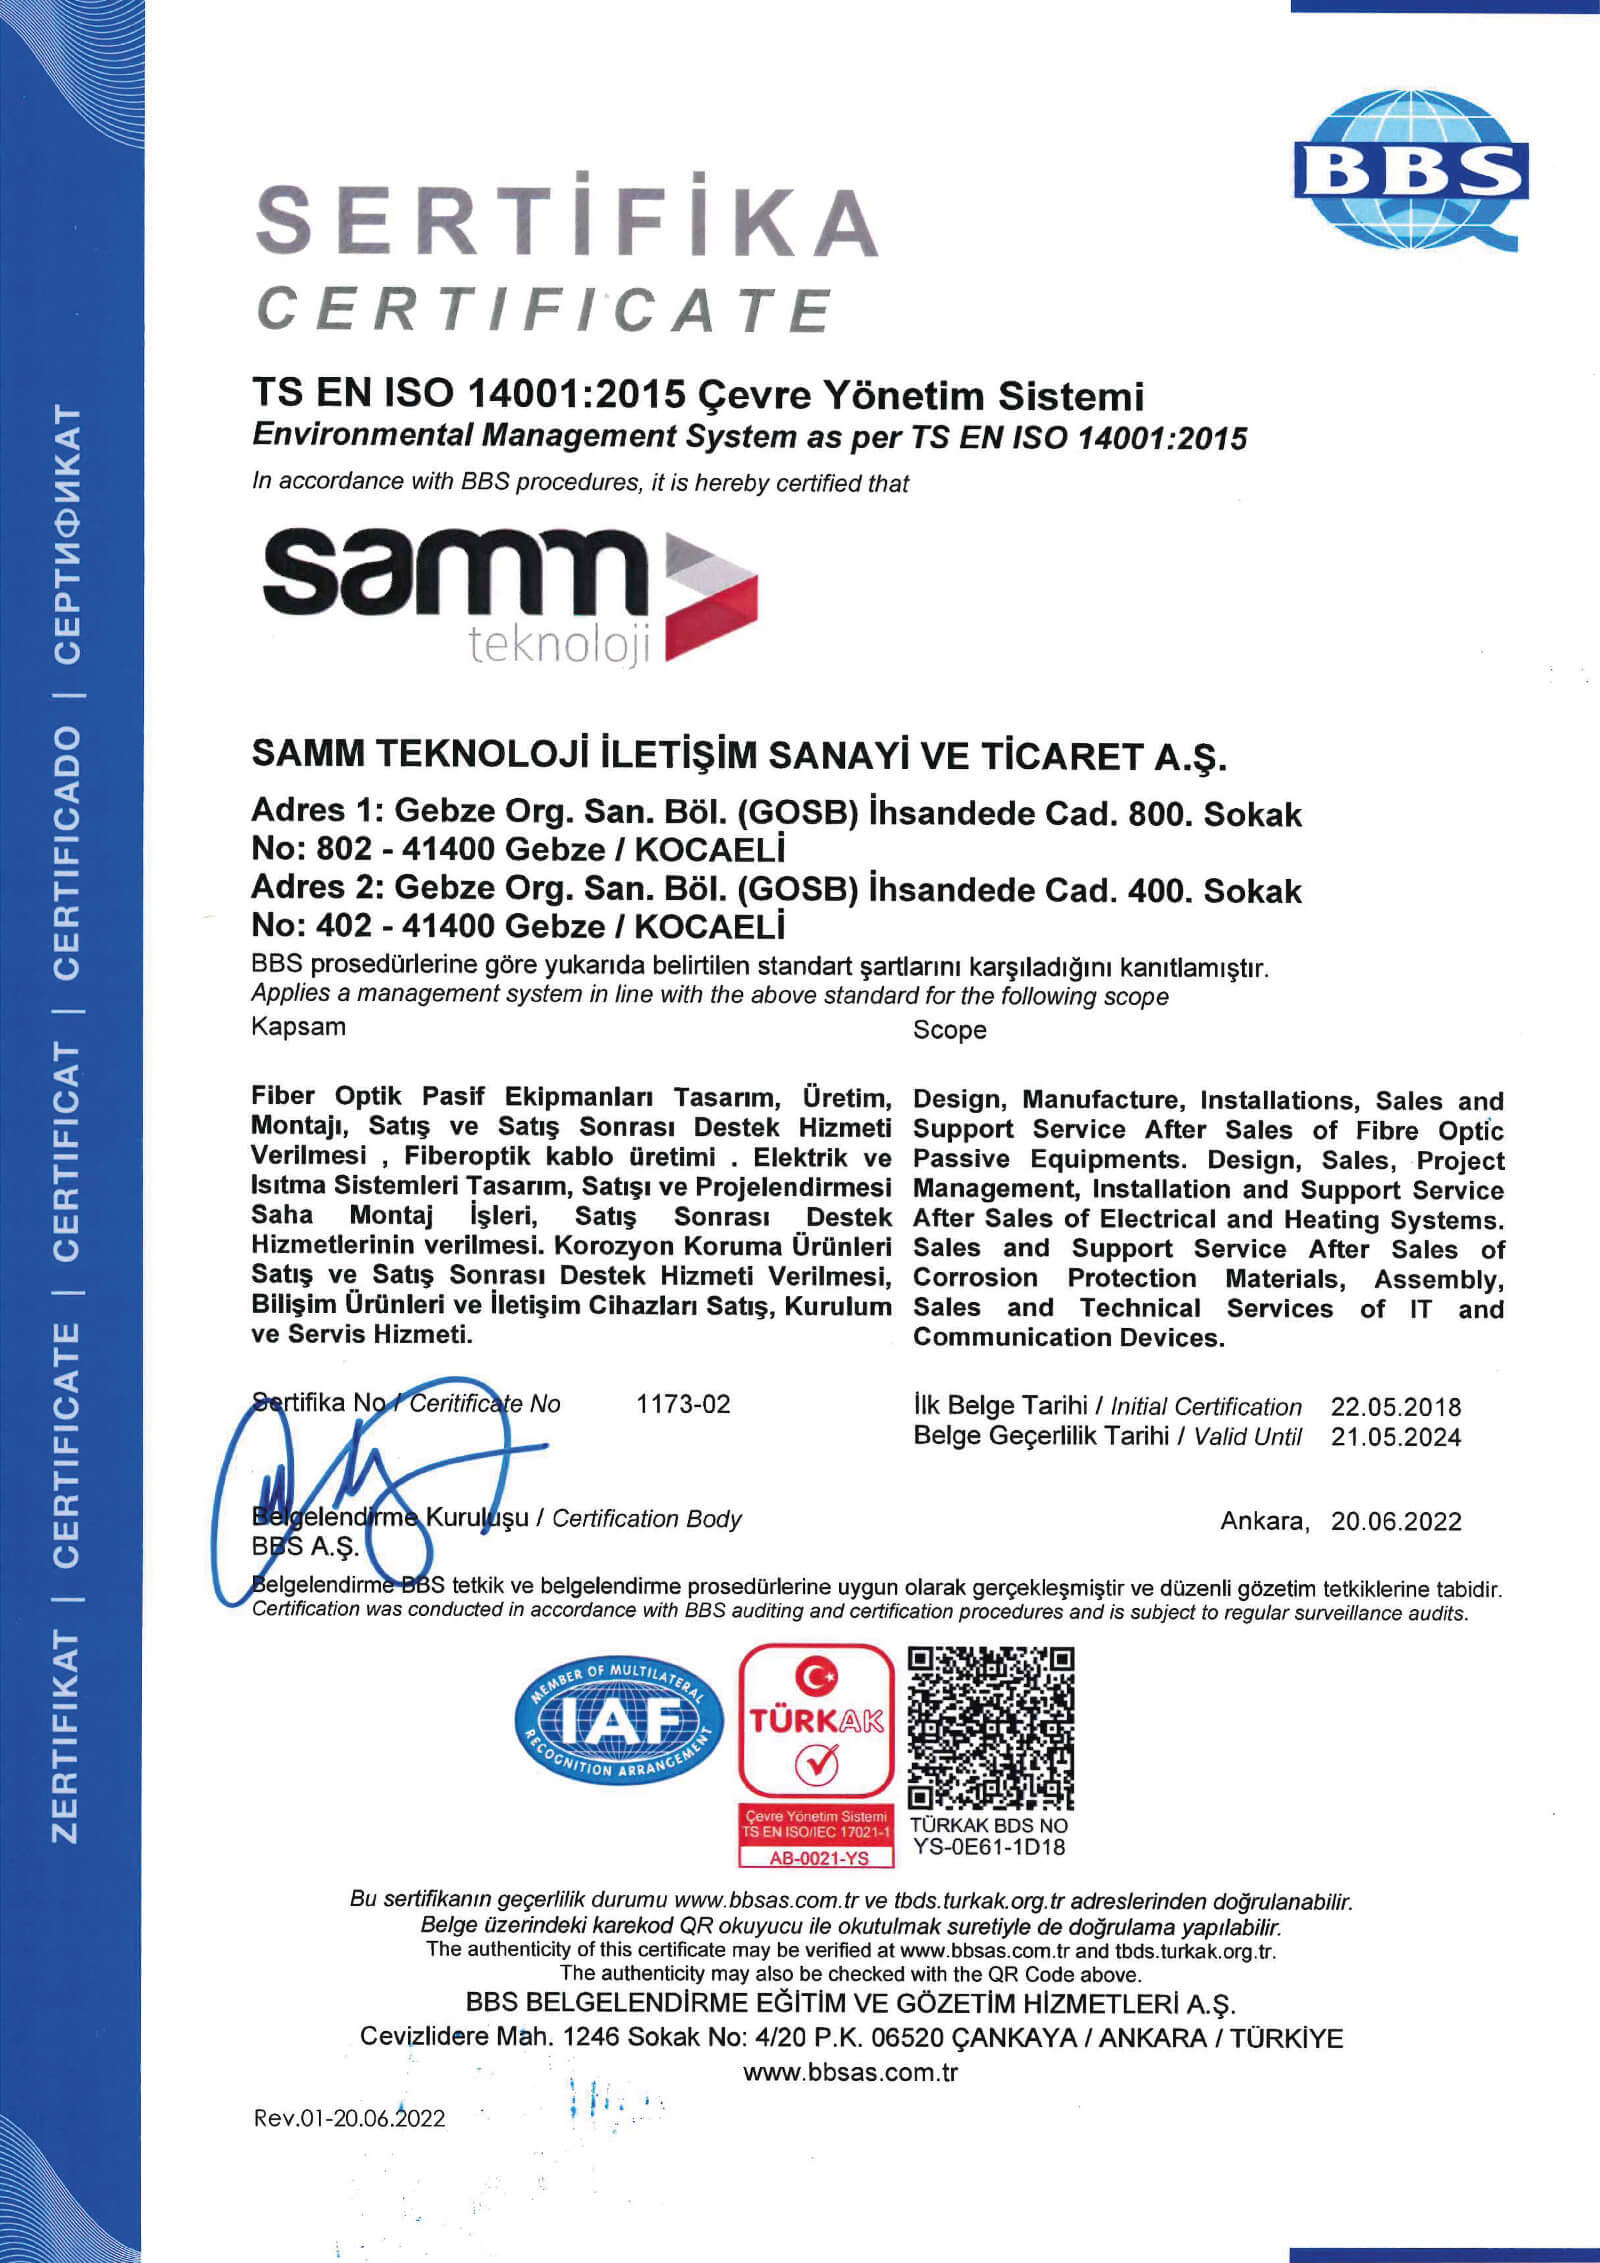 QUALITY MANAGEMENT SYSTEM CERTIFICATE ISO 14001-2015